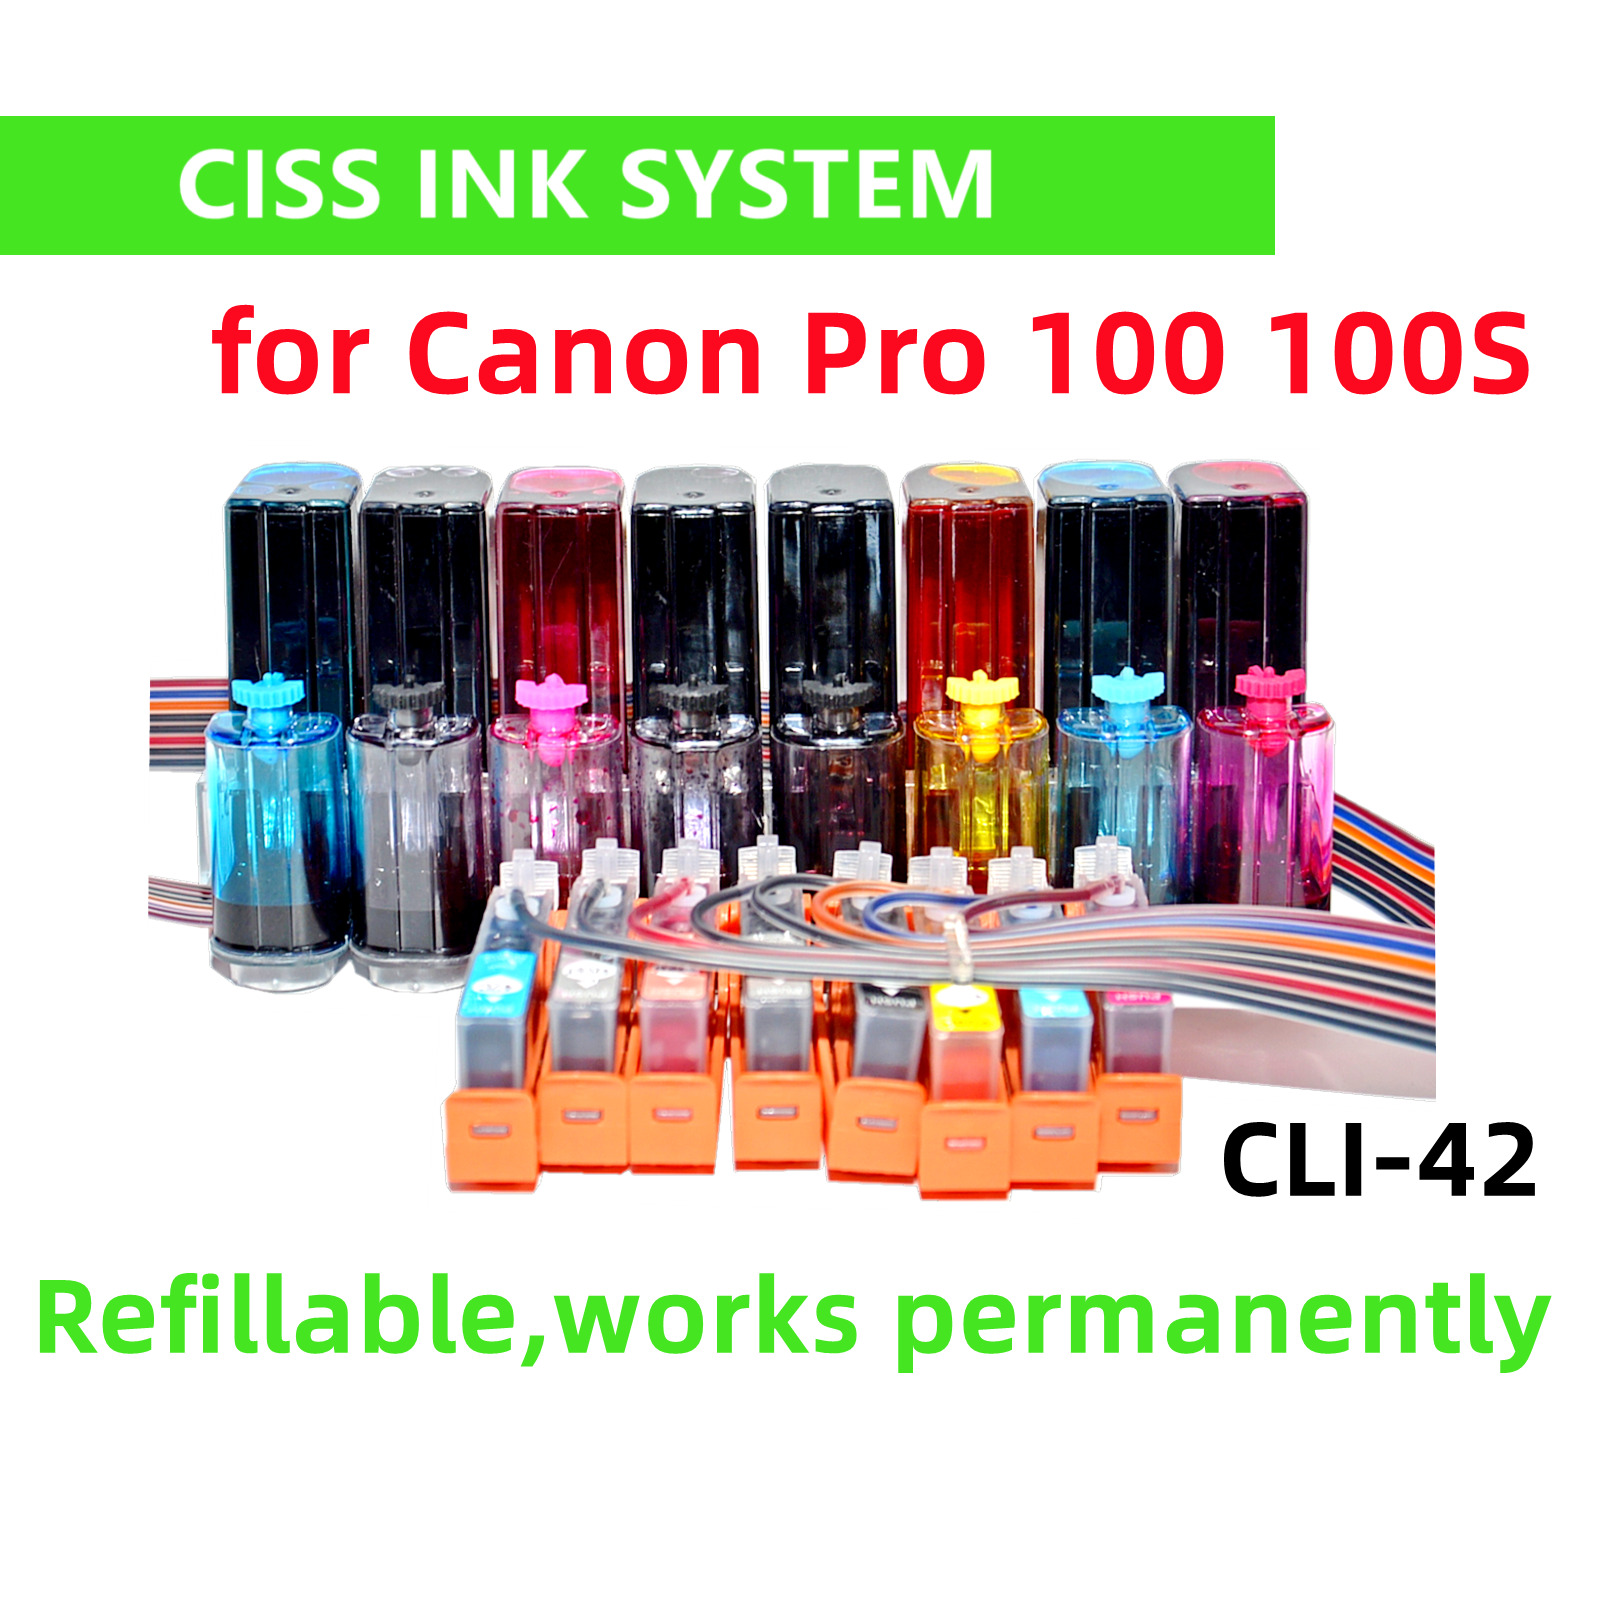 Refillable CIS CISS ink system for Canon Pro 100 100S Printer cli-42 cartridge .